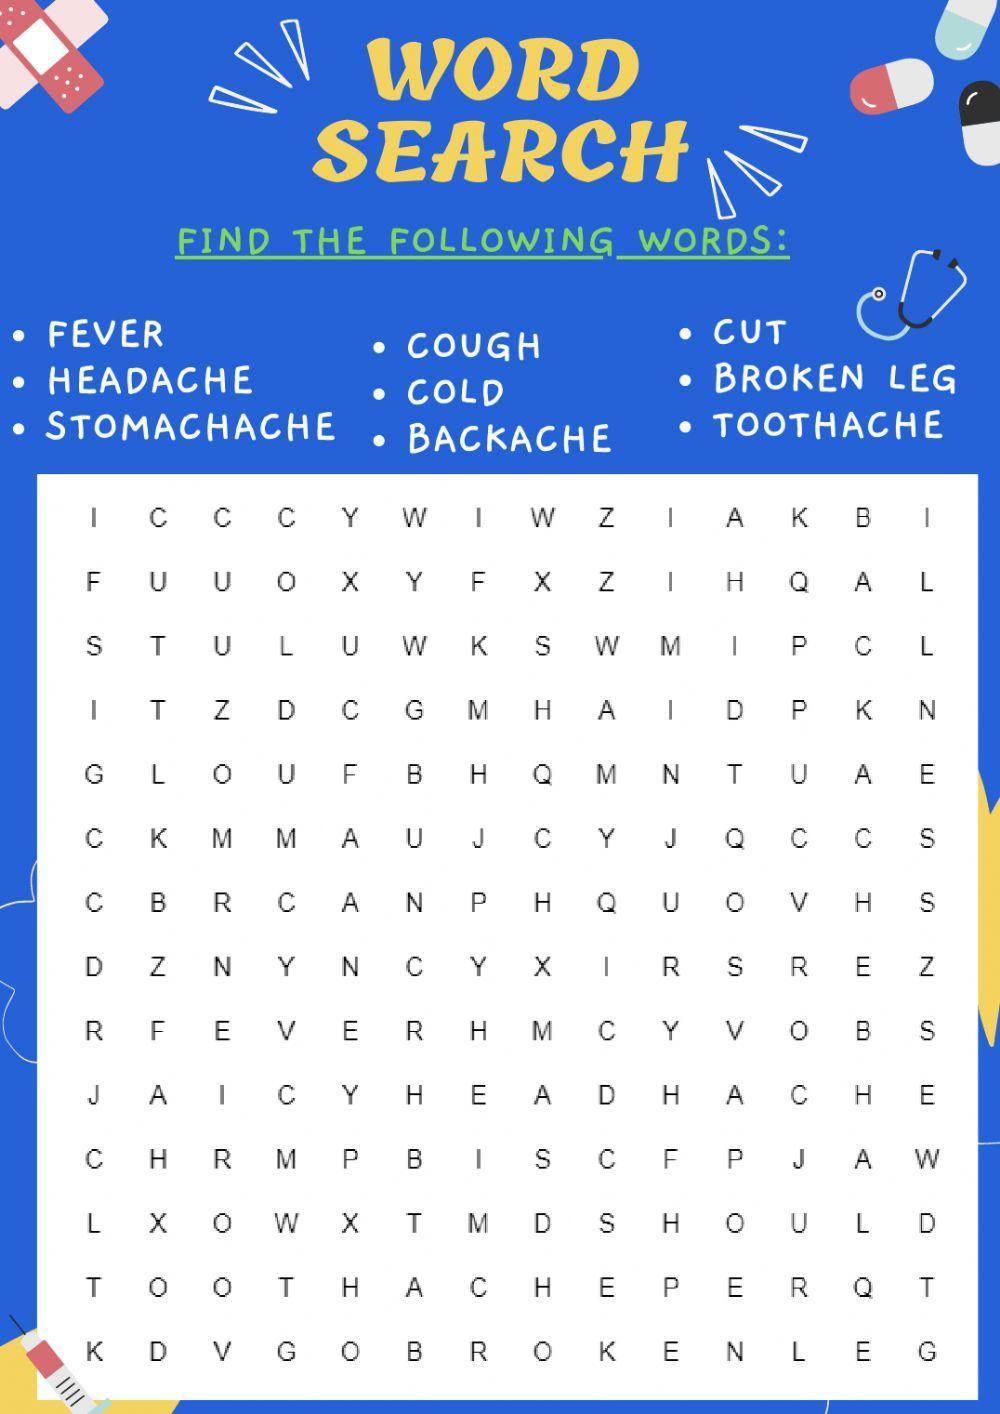 Wordsearch - illness and injuries